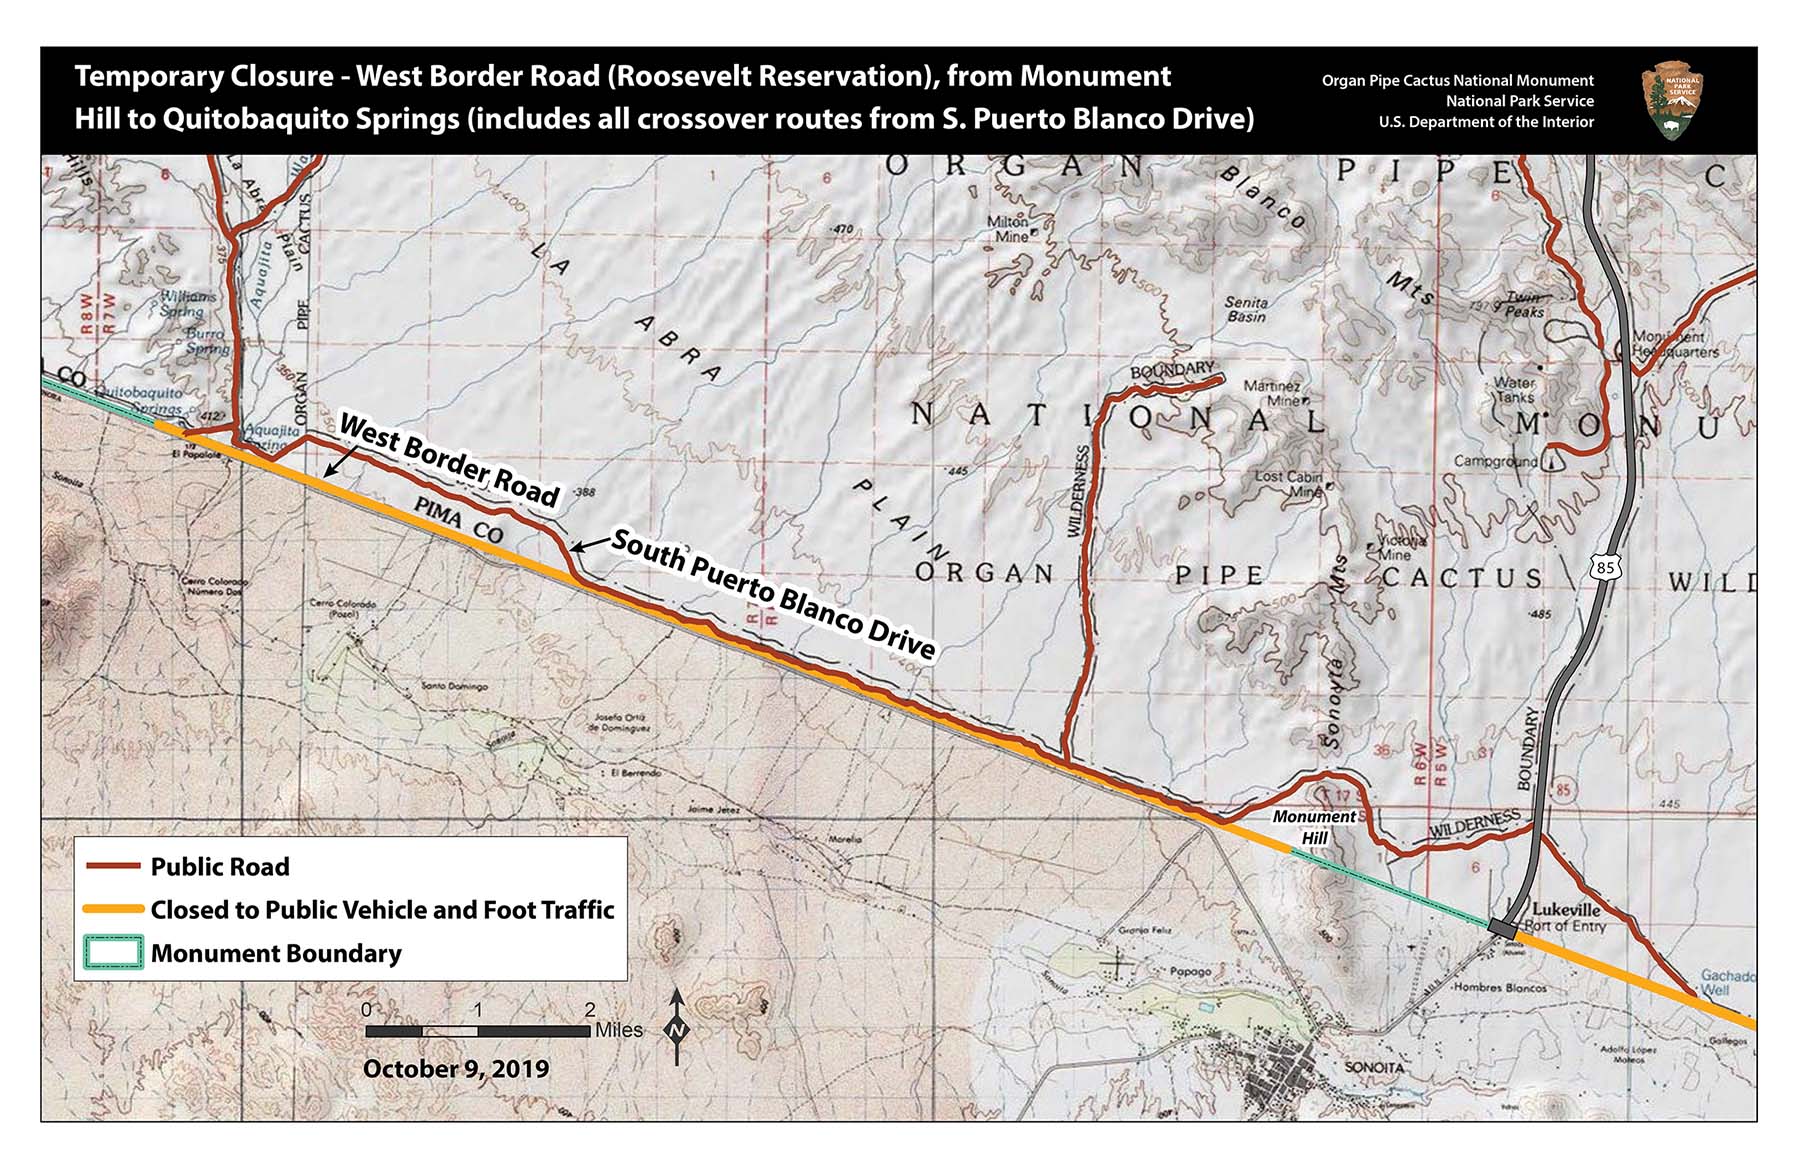 map showing the temporary closure (yellow line) of West Border Road, from Monument Hill to Quitobaquito Springs, including all crossover routes from S. Puerto Blanco Drive